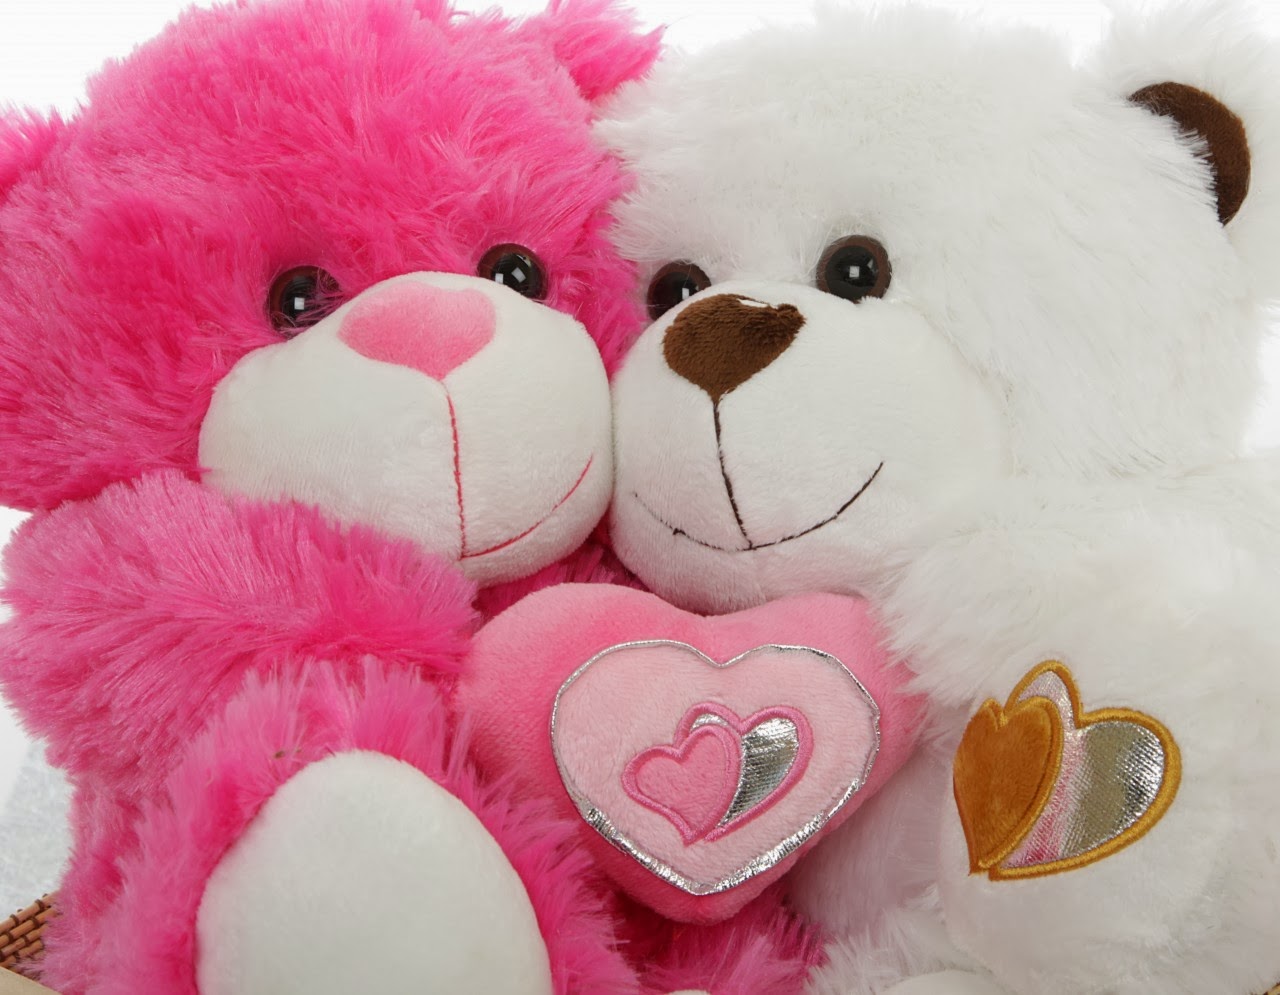 Pink Cute Teddy Bears Image Amp Pictures Becuo